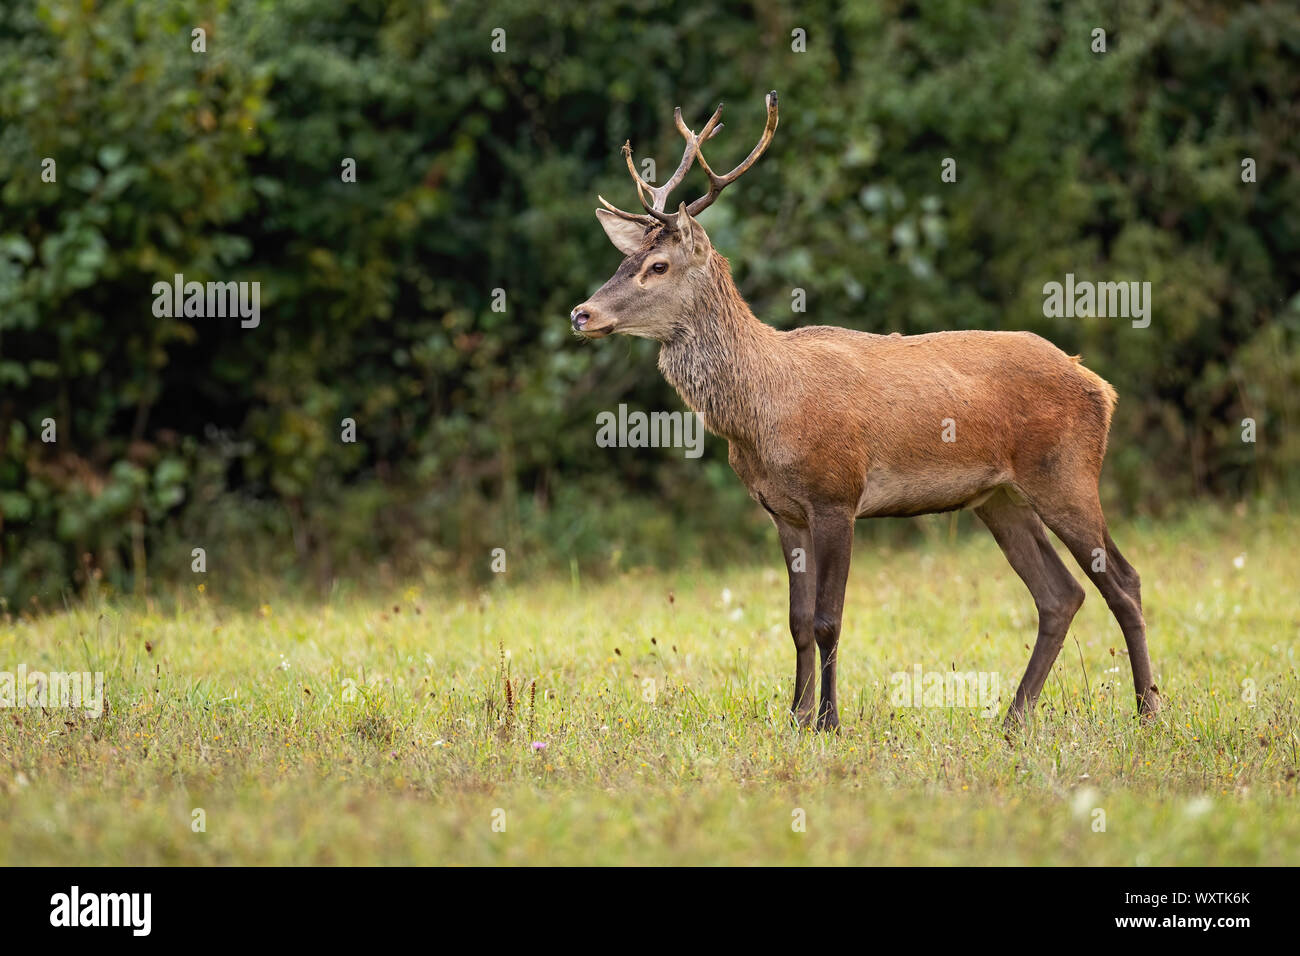 Red deer stag watching anxiously in the wilderness with copy space. Stock Photo